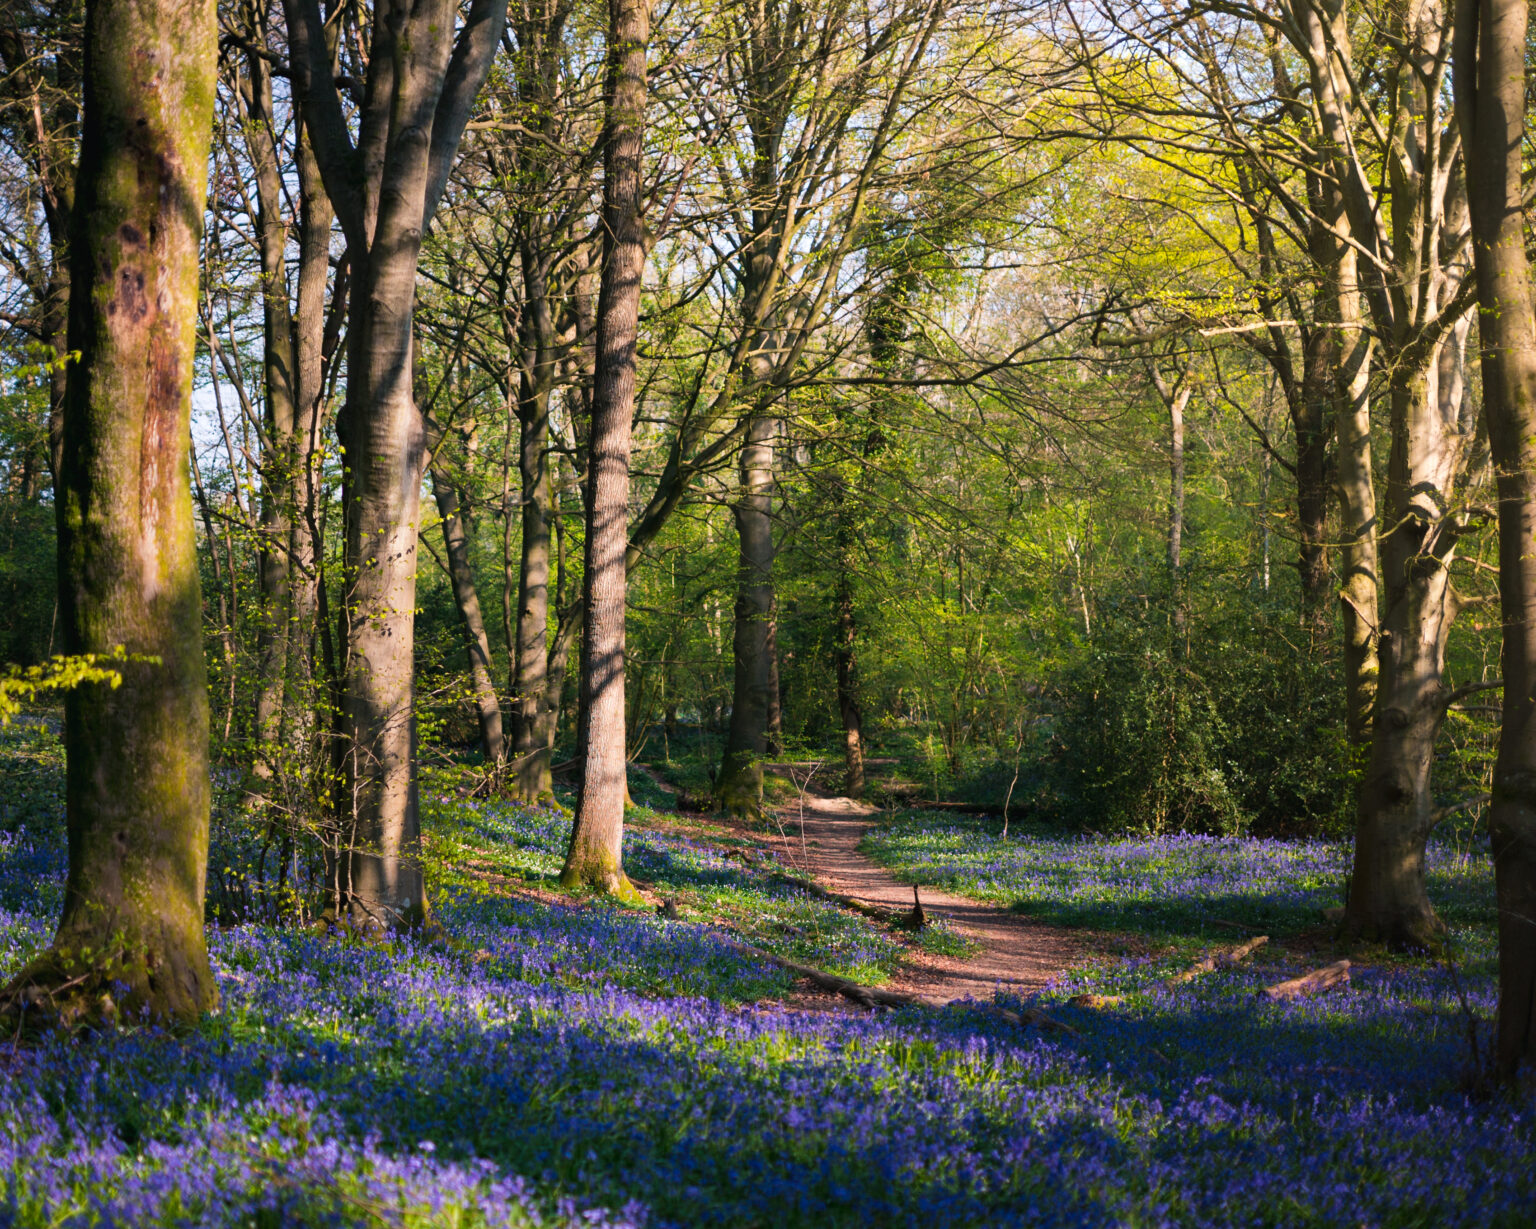 Bluebells within woodland at Staffhurst Woods, photo by Markus Dell